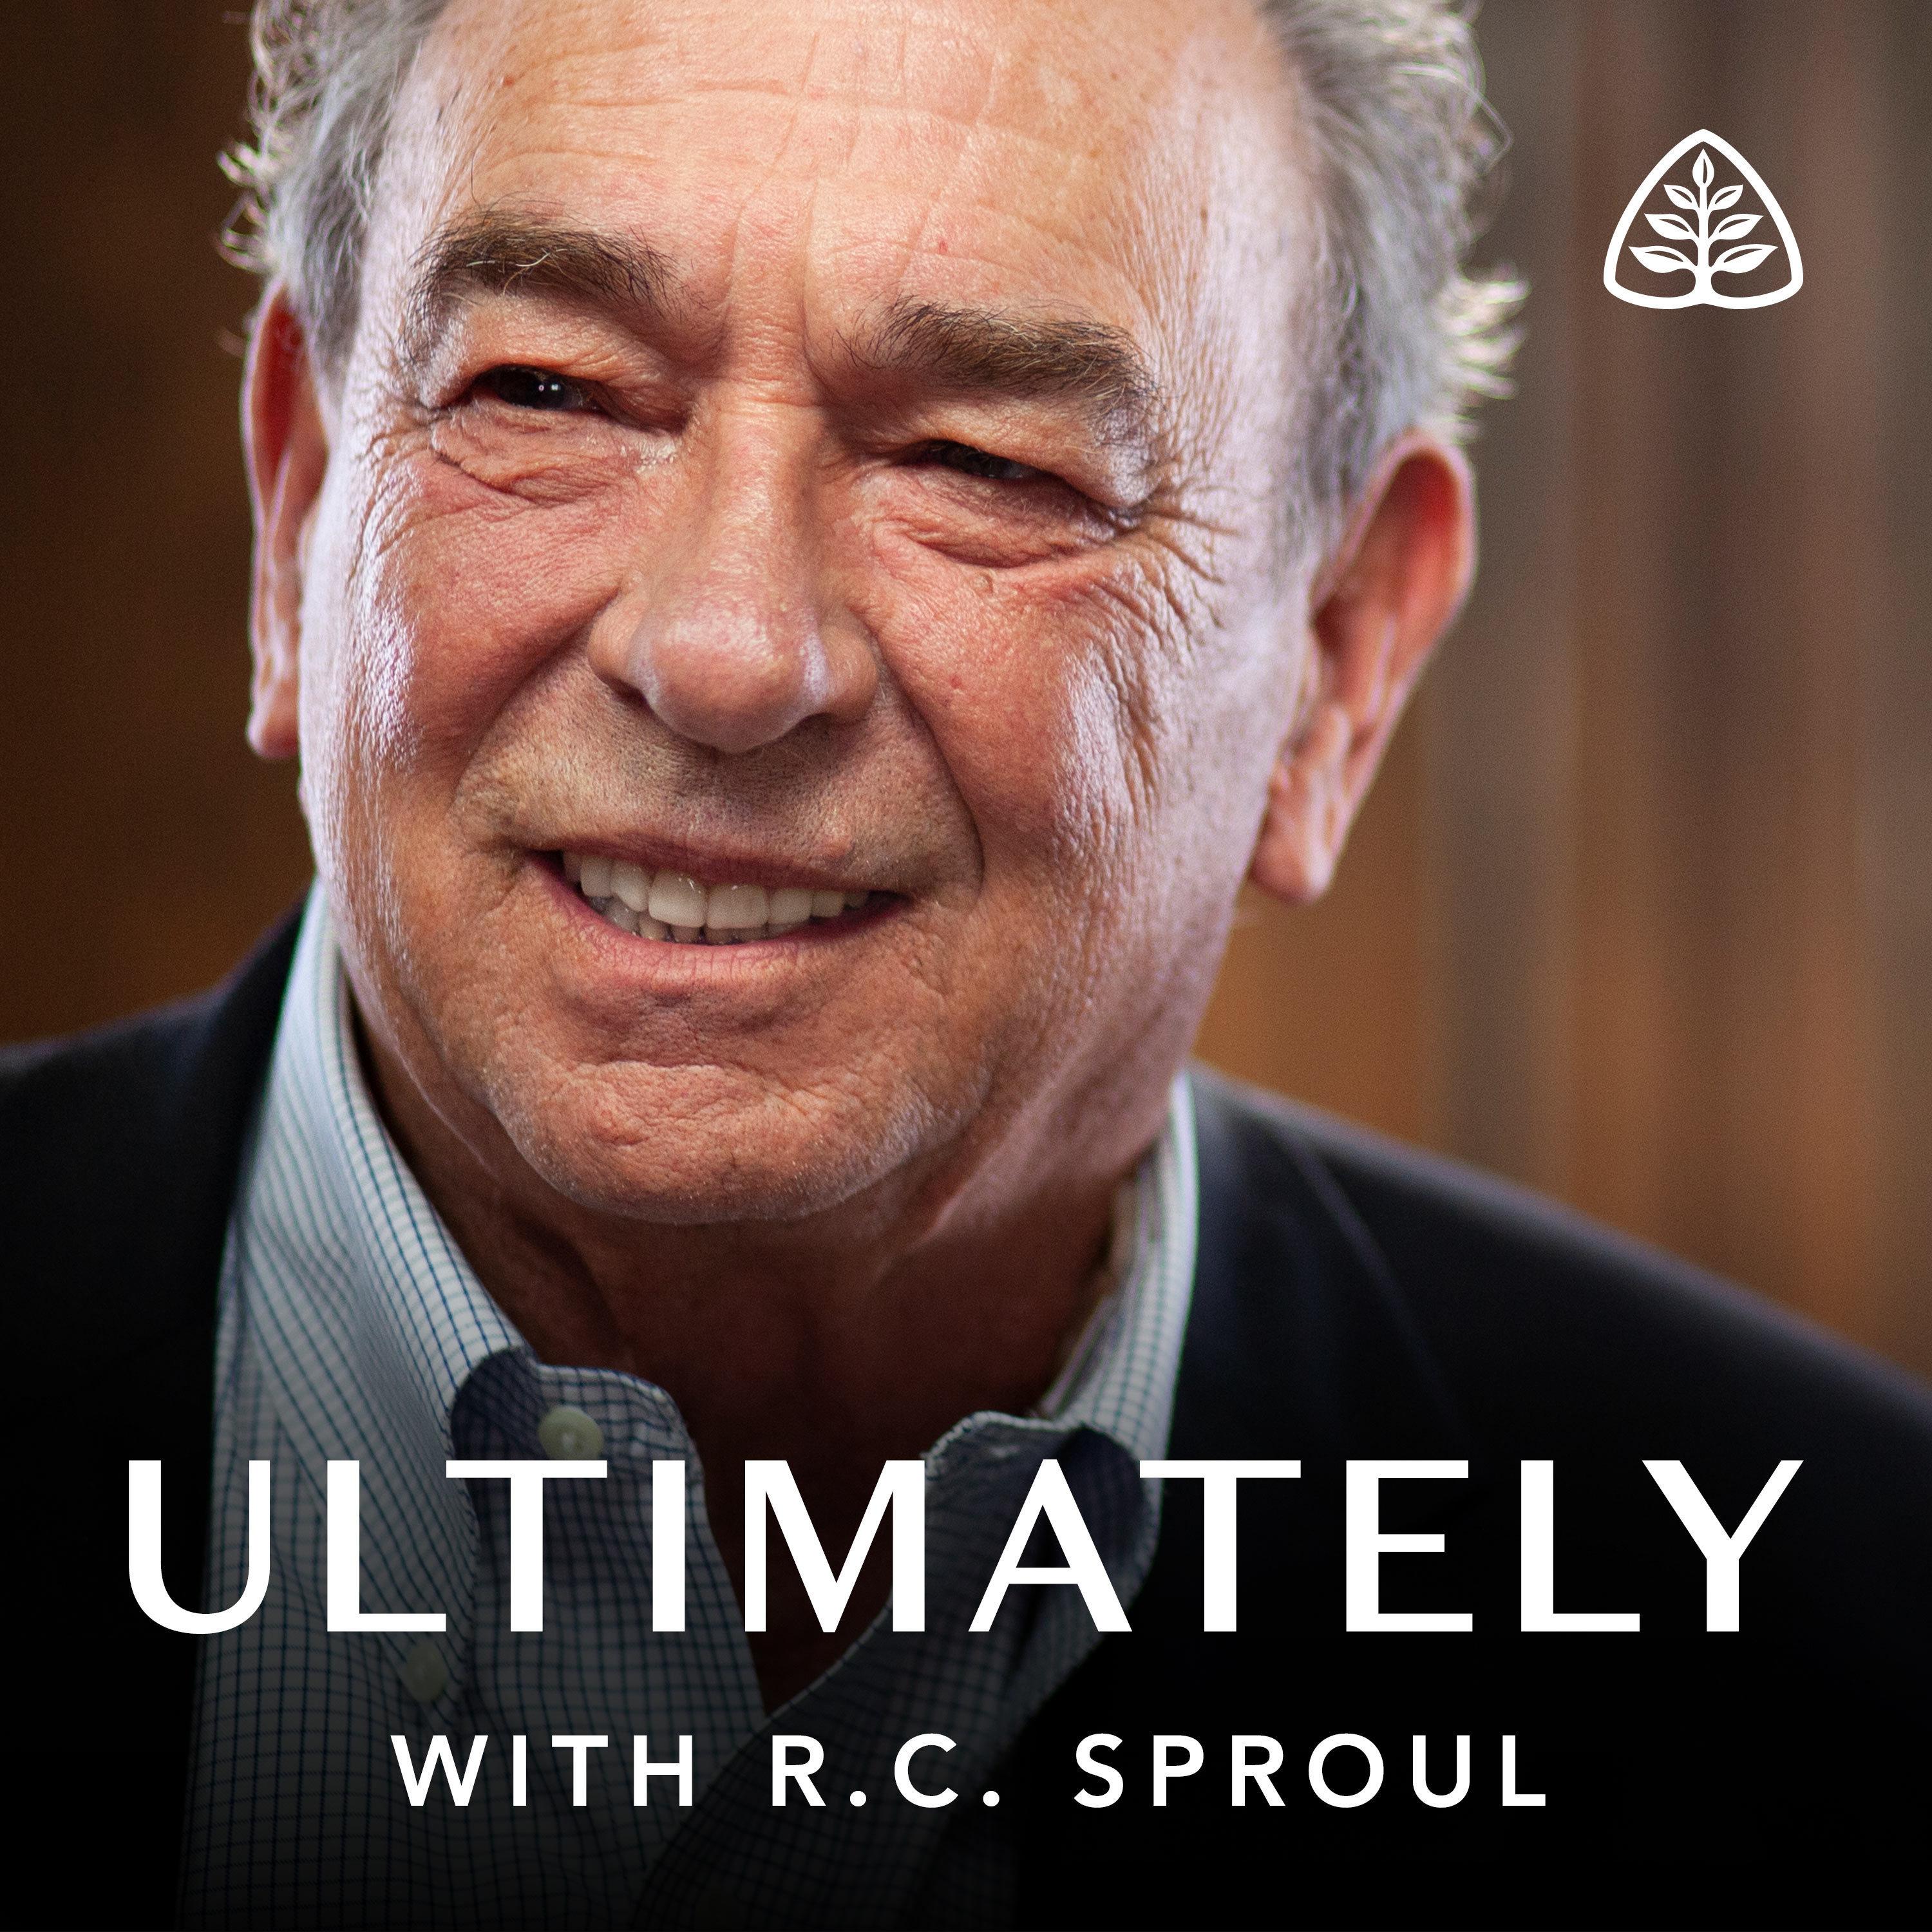 Art for The Elements of a Christian Worldview by R.C. Sproul